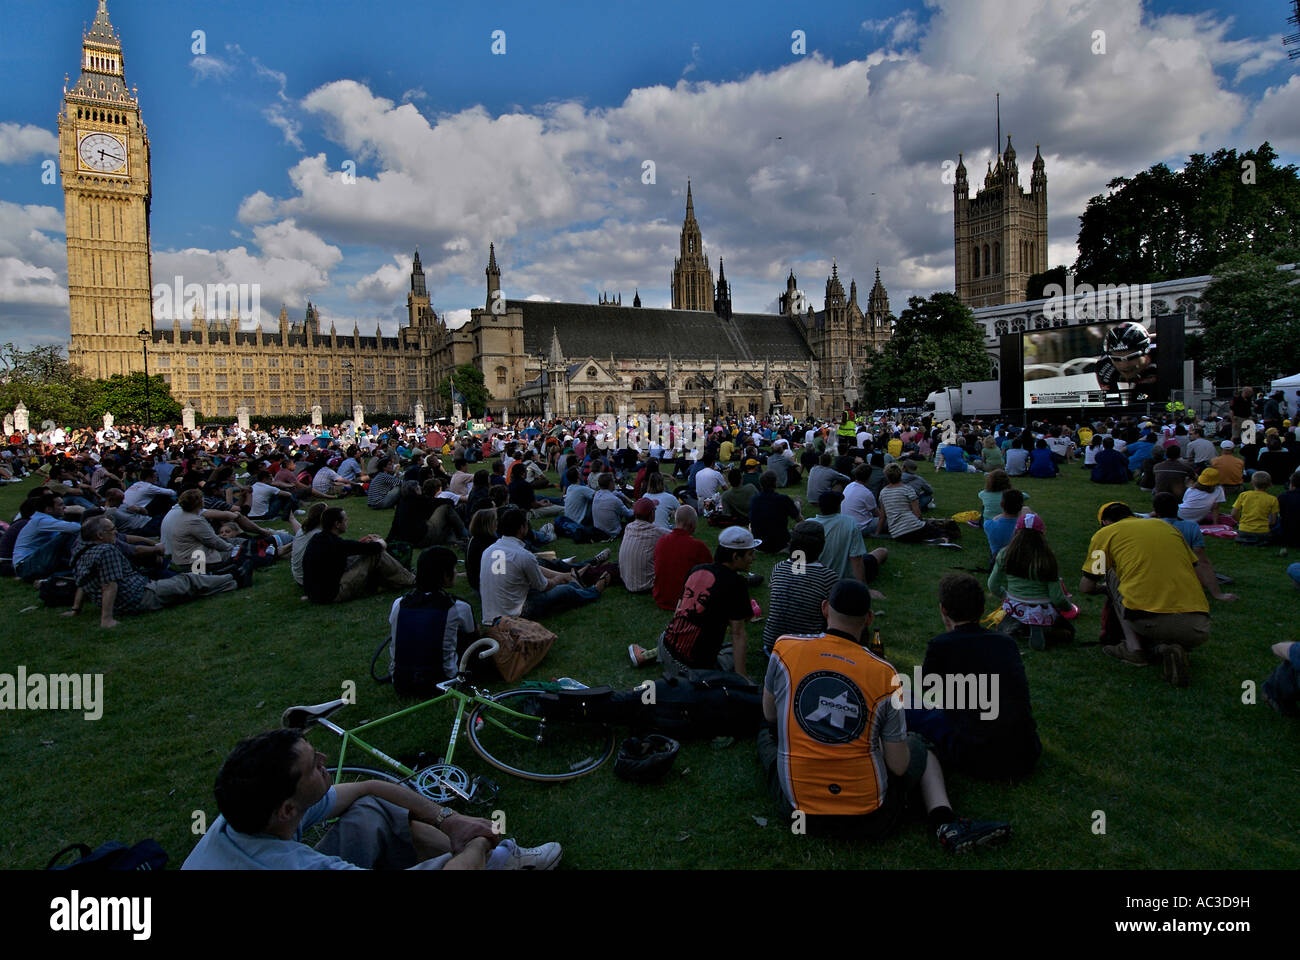 Crowds Watching the big screen in Parliament Square during teh prologue of the Tour de France July 2007 Stock Photo